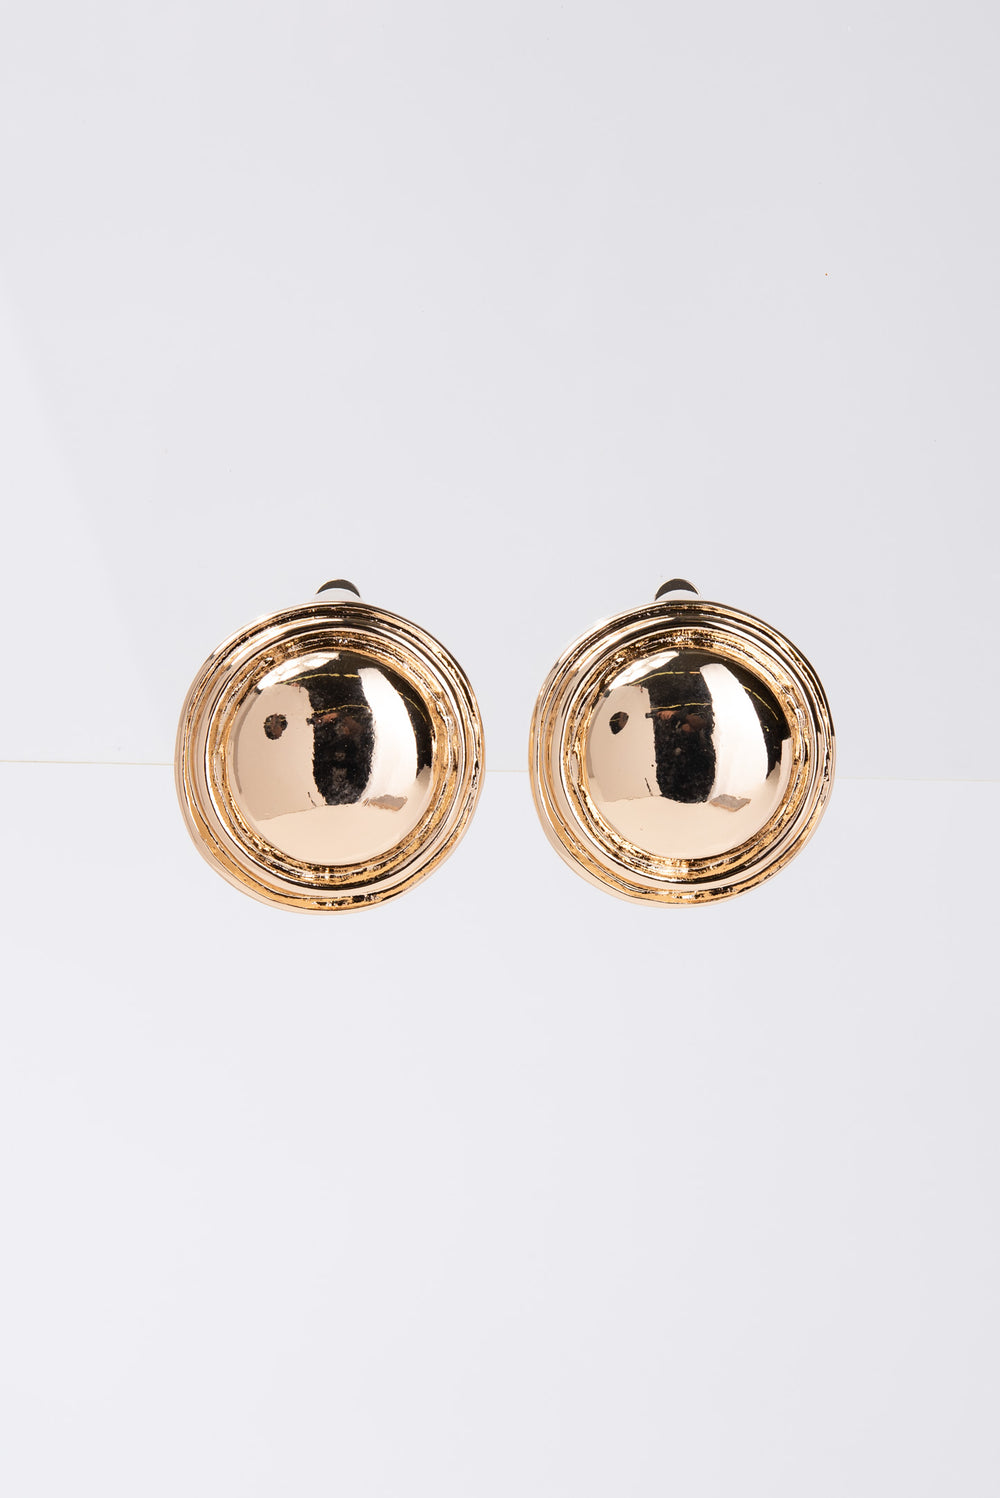 Catalina Vintage Round Circle Button Clip On Earrings - Gold